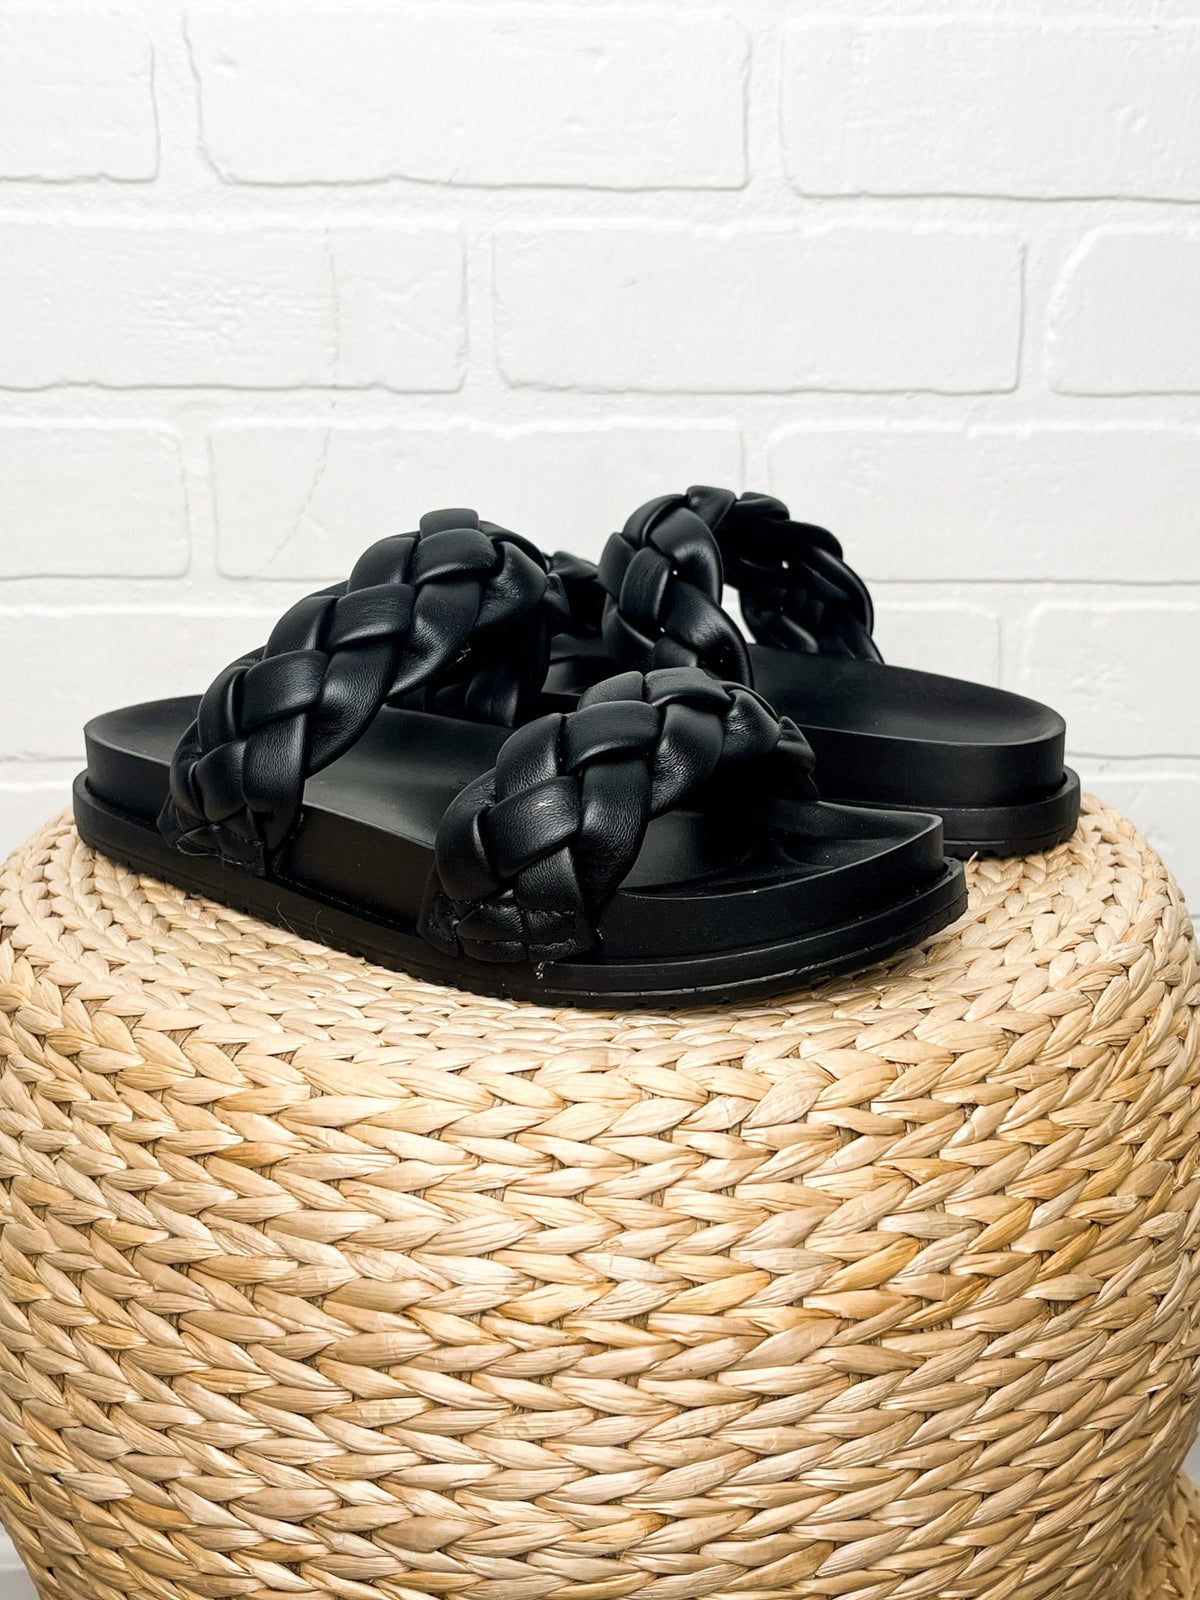 Albina braided sandal black - Cute shoes - Trendy Shoes at Lush Fashion Lounge Boutique in Oklahoma City